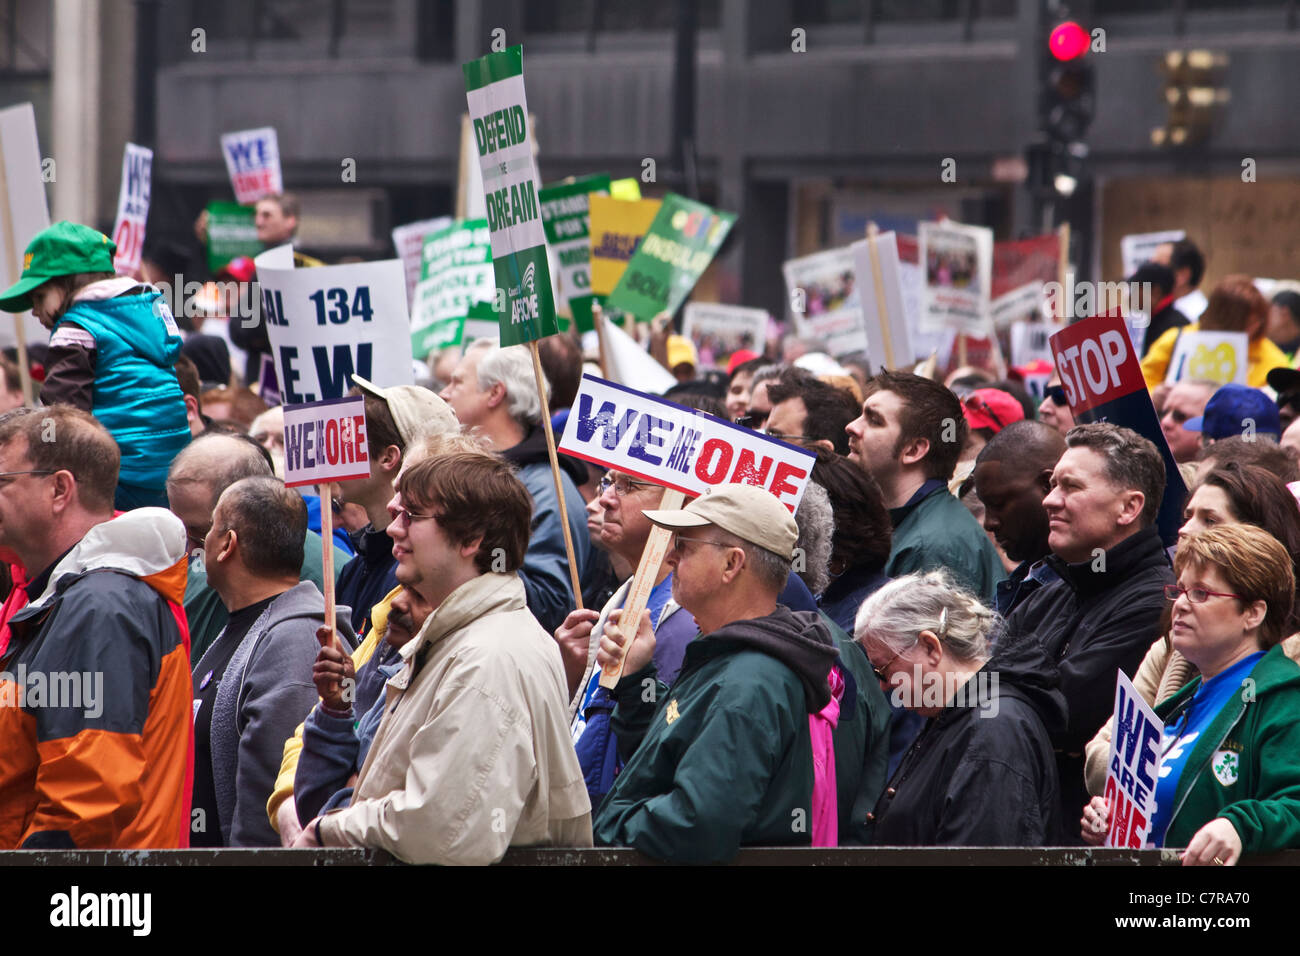 Union supporters demonstrating at Daley Center Plaza, Chicago, Illinois. Stock Photo